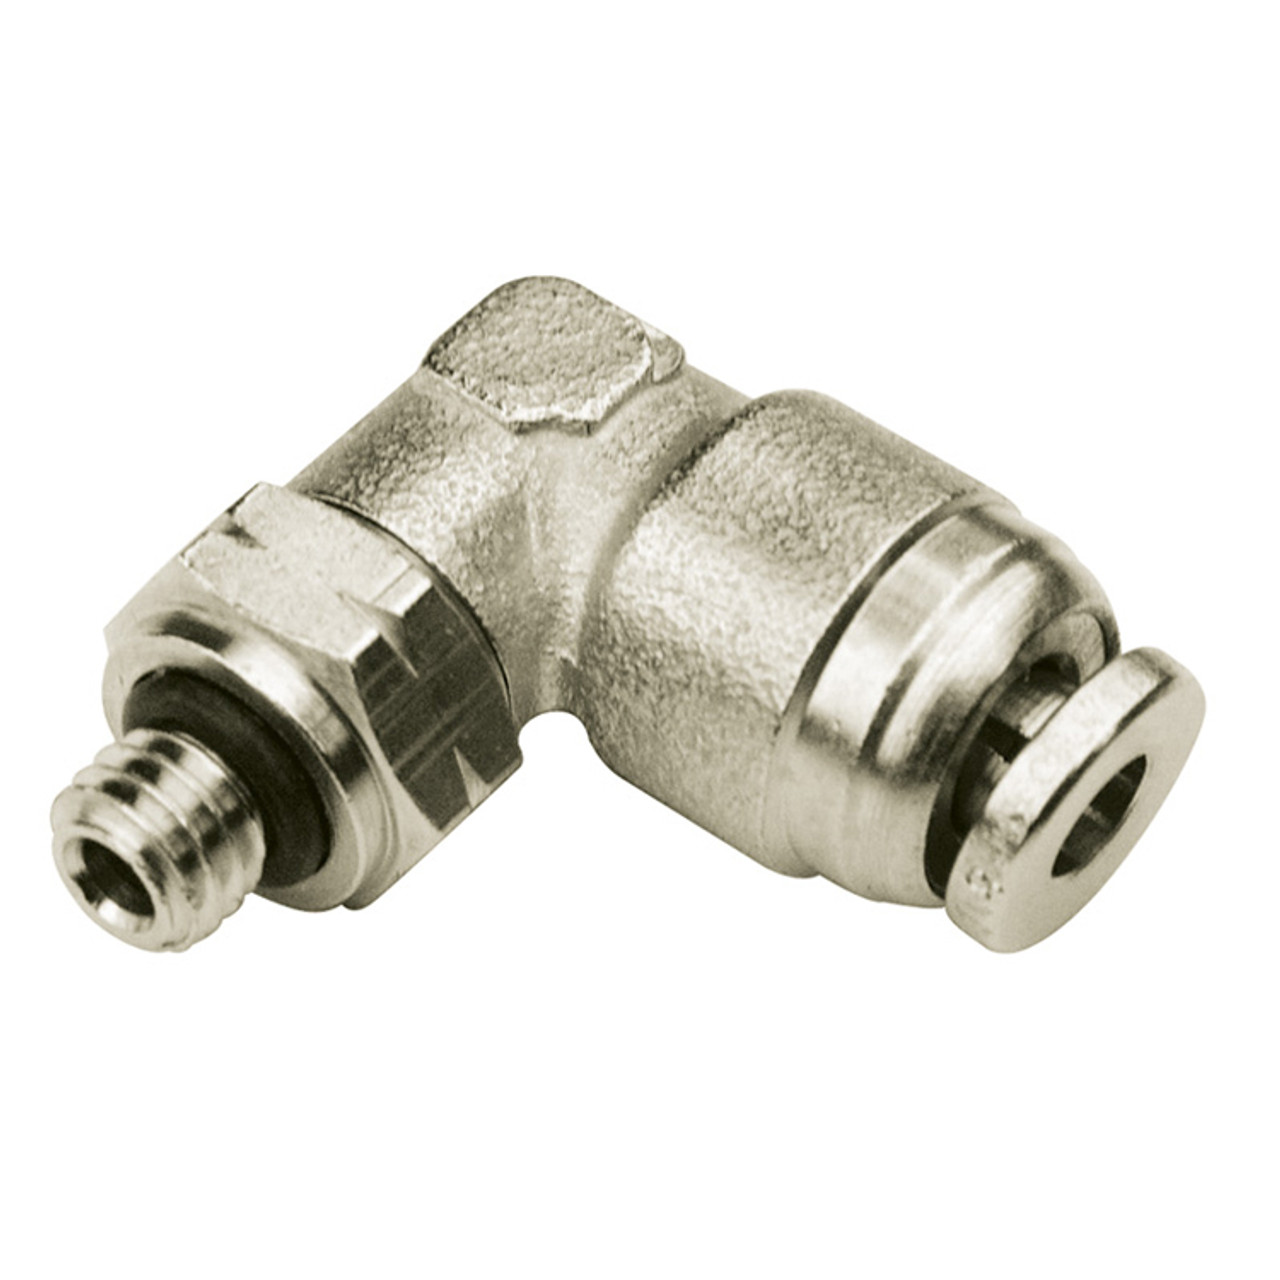 10-32 x 5/32" Nickel Plated Brass Male Thread - Push-To-Connect 90° Elbow   G6096-UNF-02.5